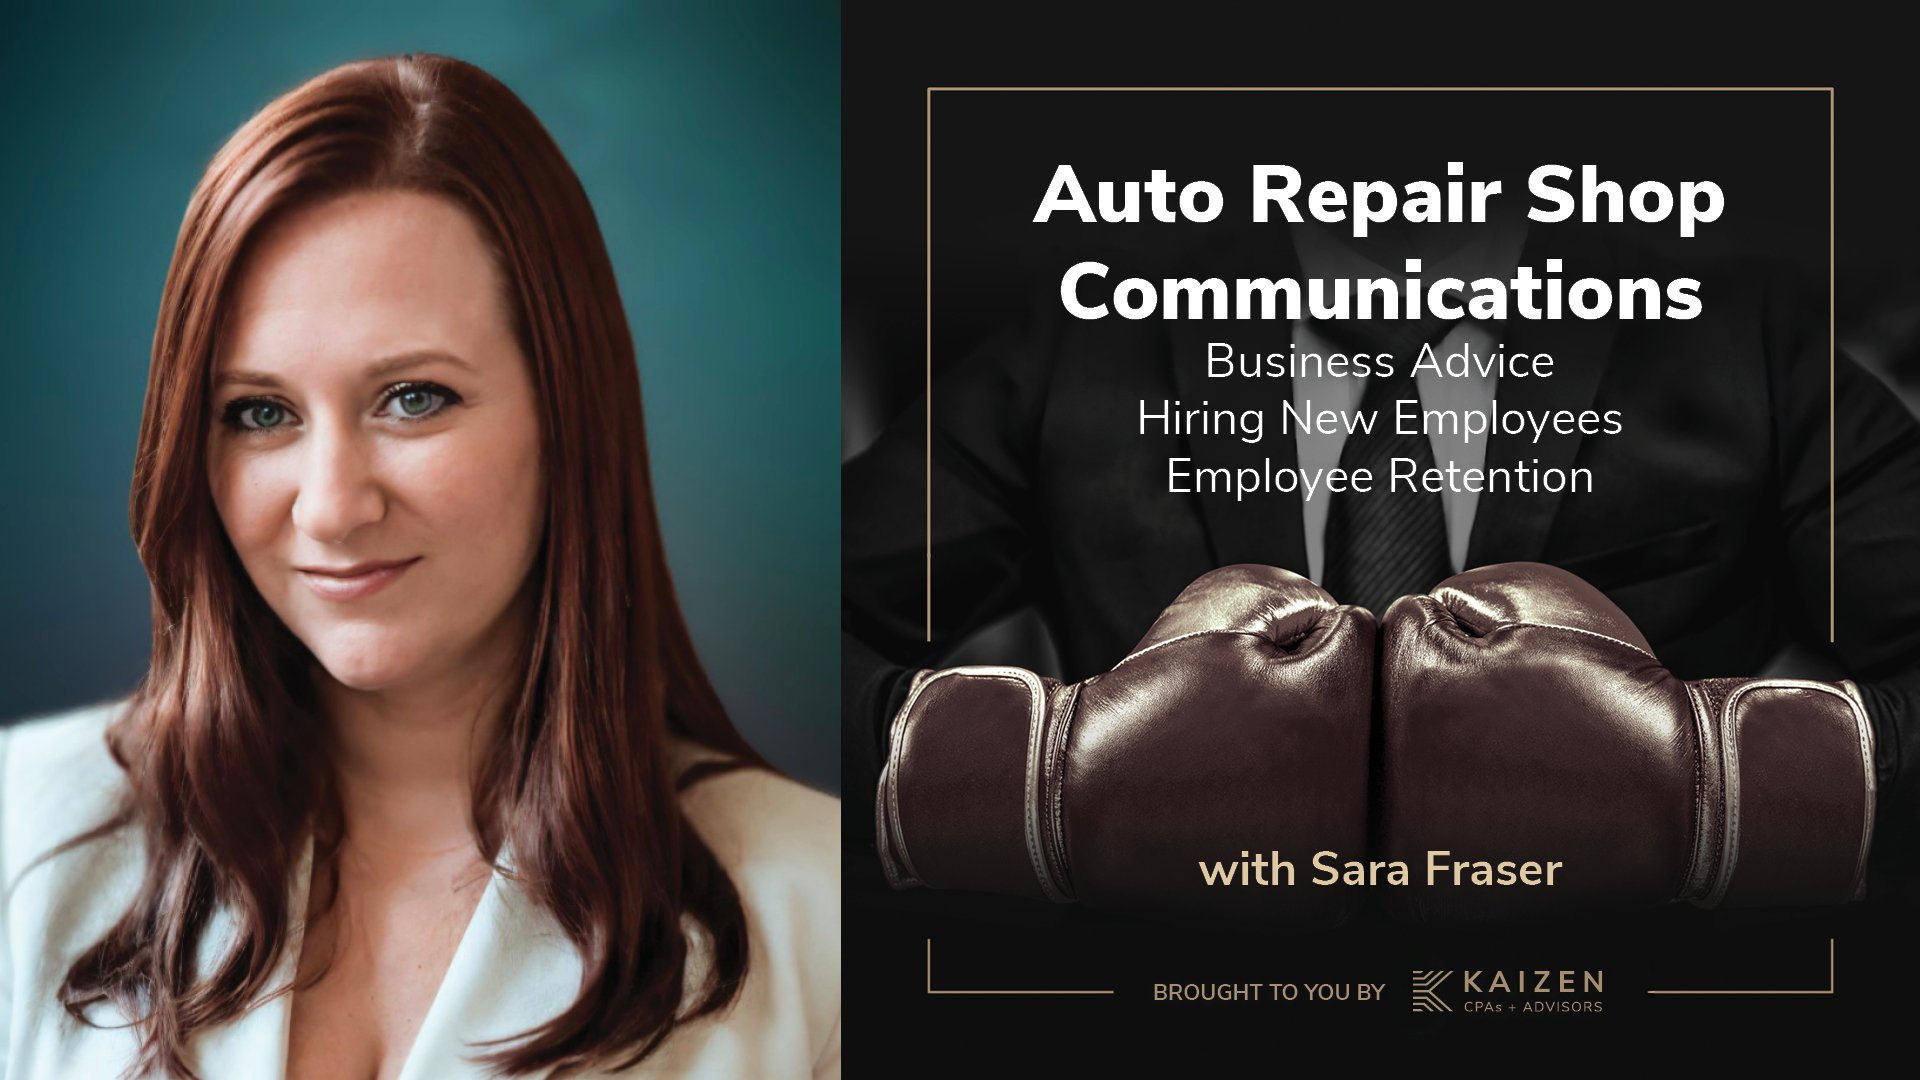 Blood, Sweat & Business podcast: Auto Repair Shop Communication Inside & Out with Sara Fraser Haas Performance Consulting LLC.